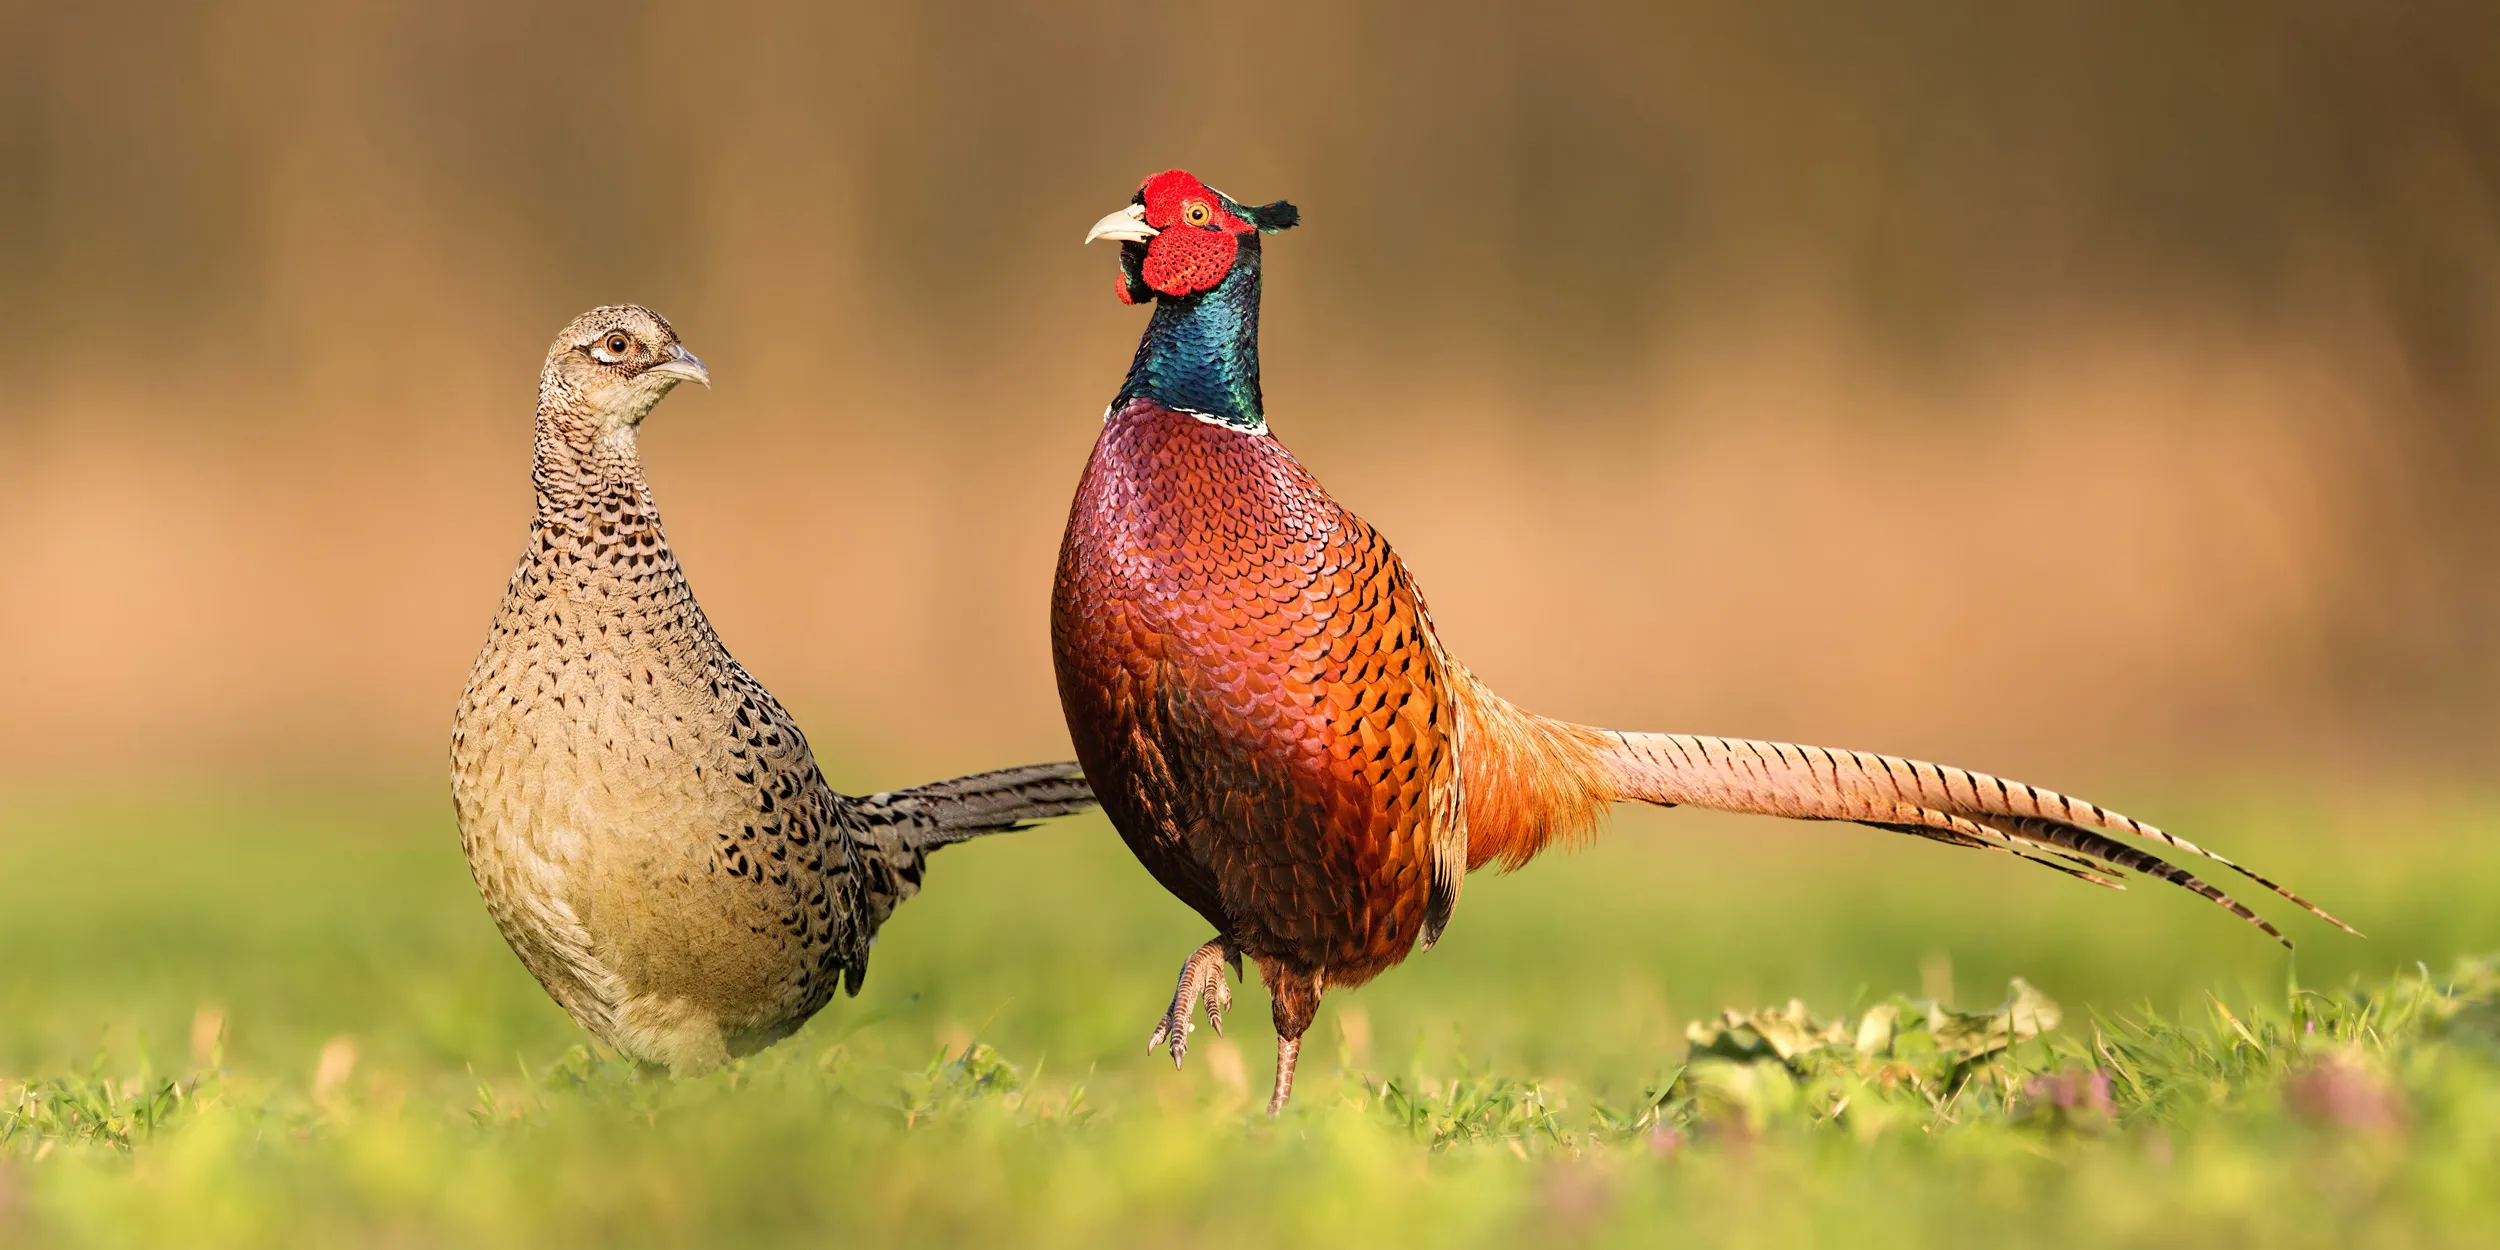 A male and female Pheasant pair stood in a grass field.